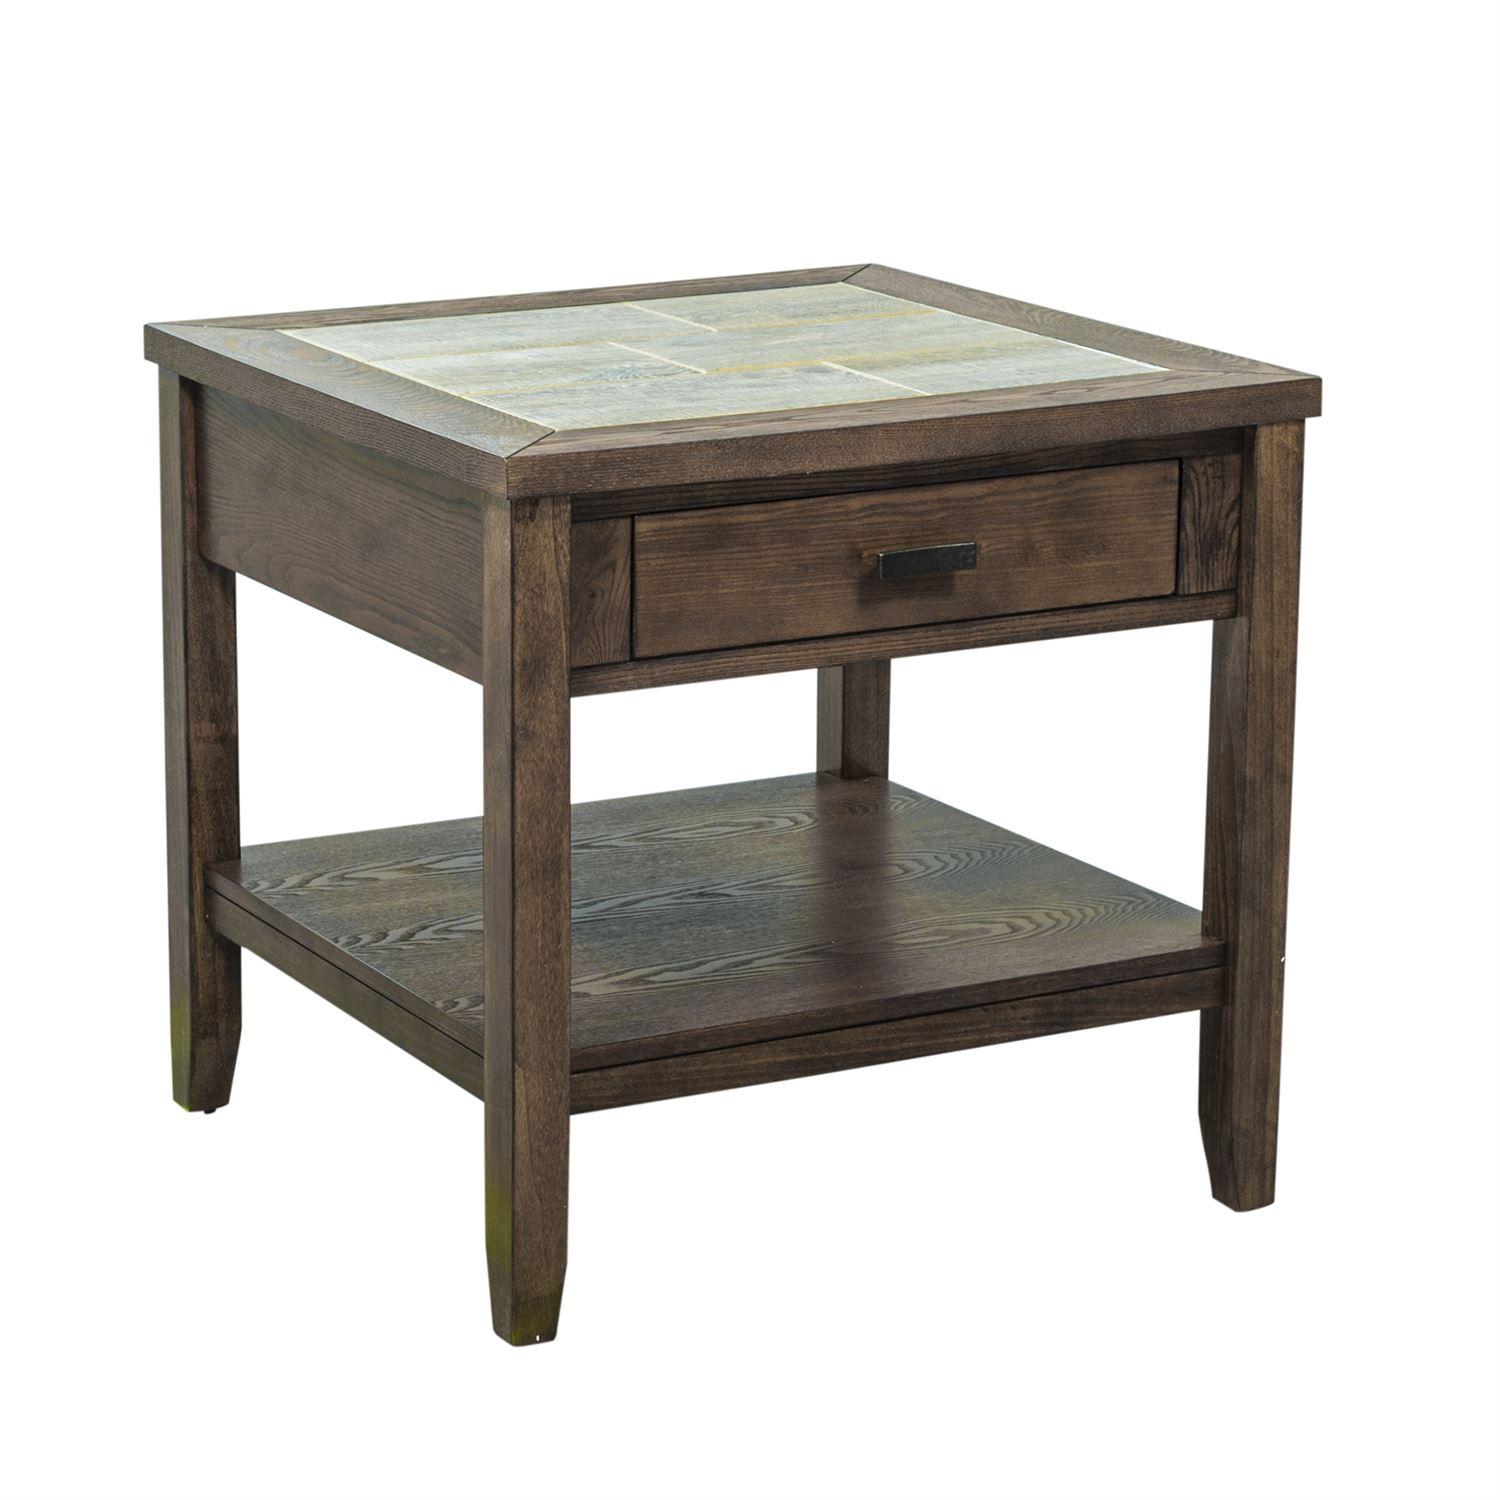 Rustic End Table Mesa Valley  (147-OT) End Table 147-OT1020 in Tobacco Matte Lacquer